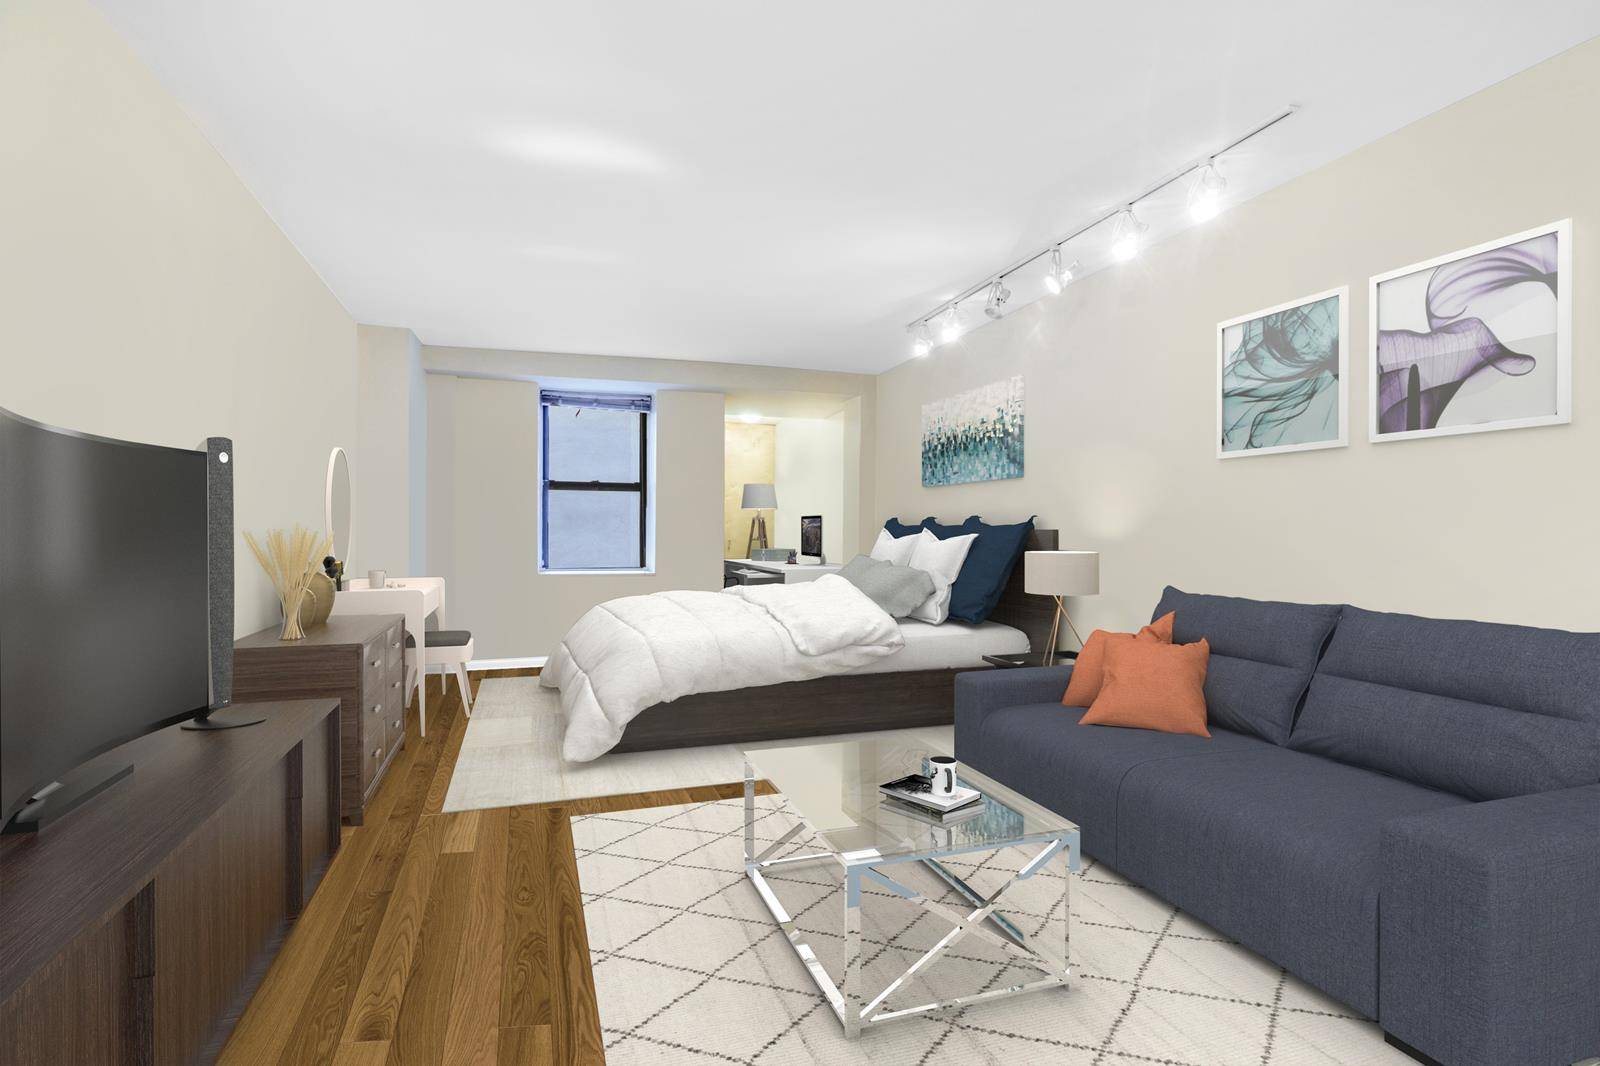 Don't miss out on this beautiful, spacious studio in one of NYC's most desired neighborhoods !